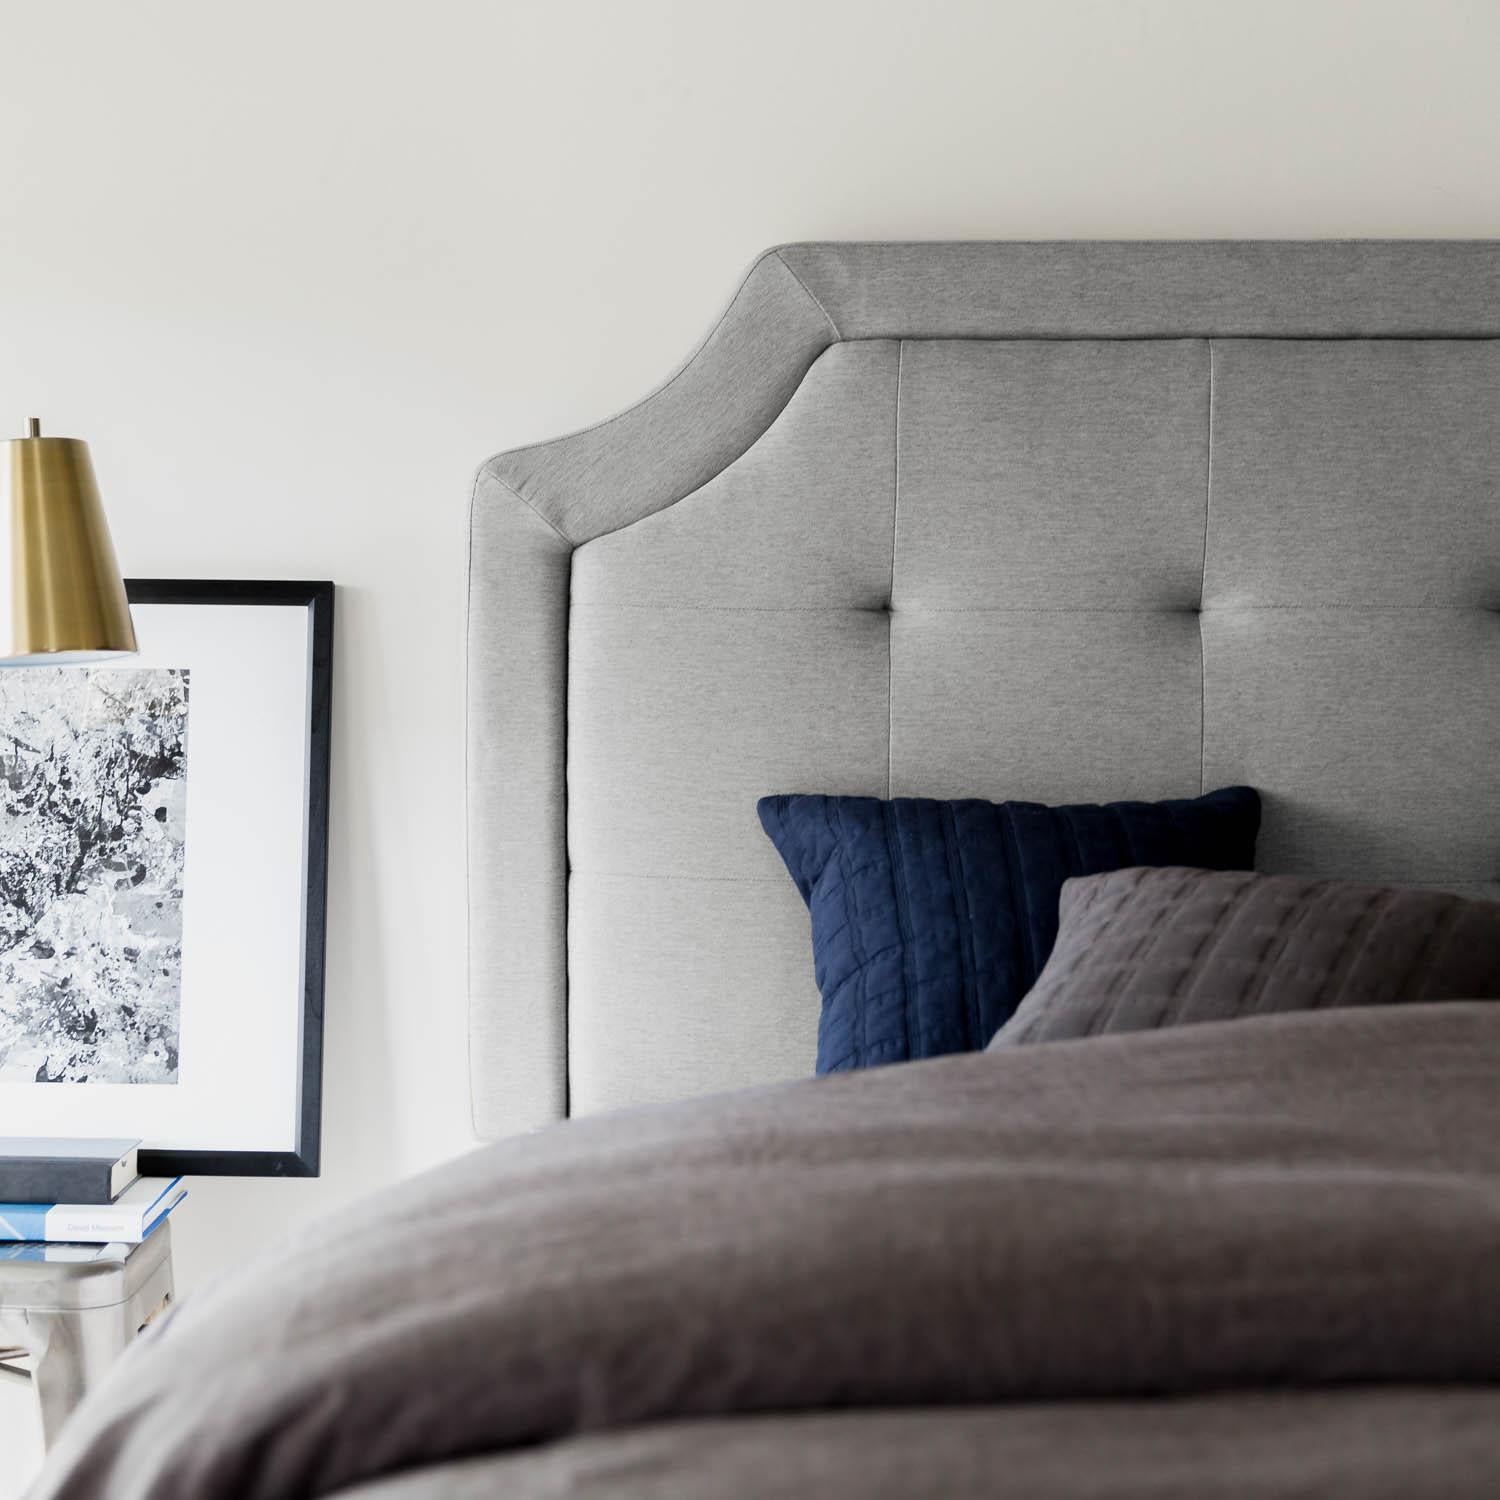 HAVE YOU HEARD? OUR HEADBOARDS ARE STEALING THE SHOW - HYGGE CAVE